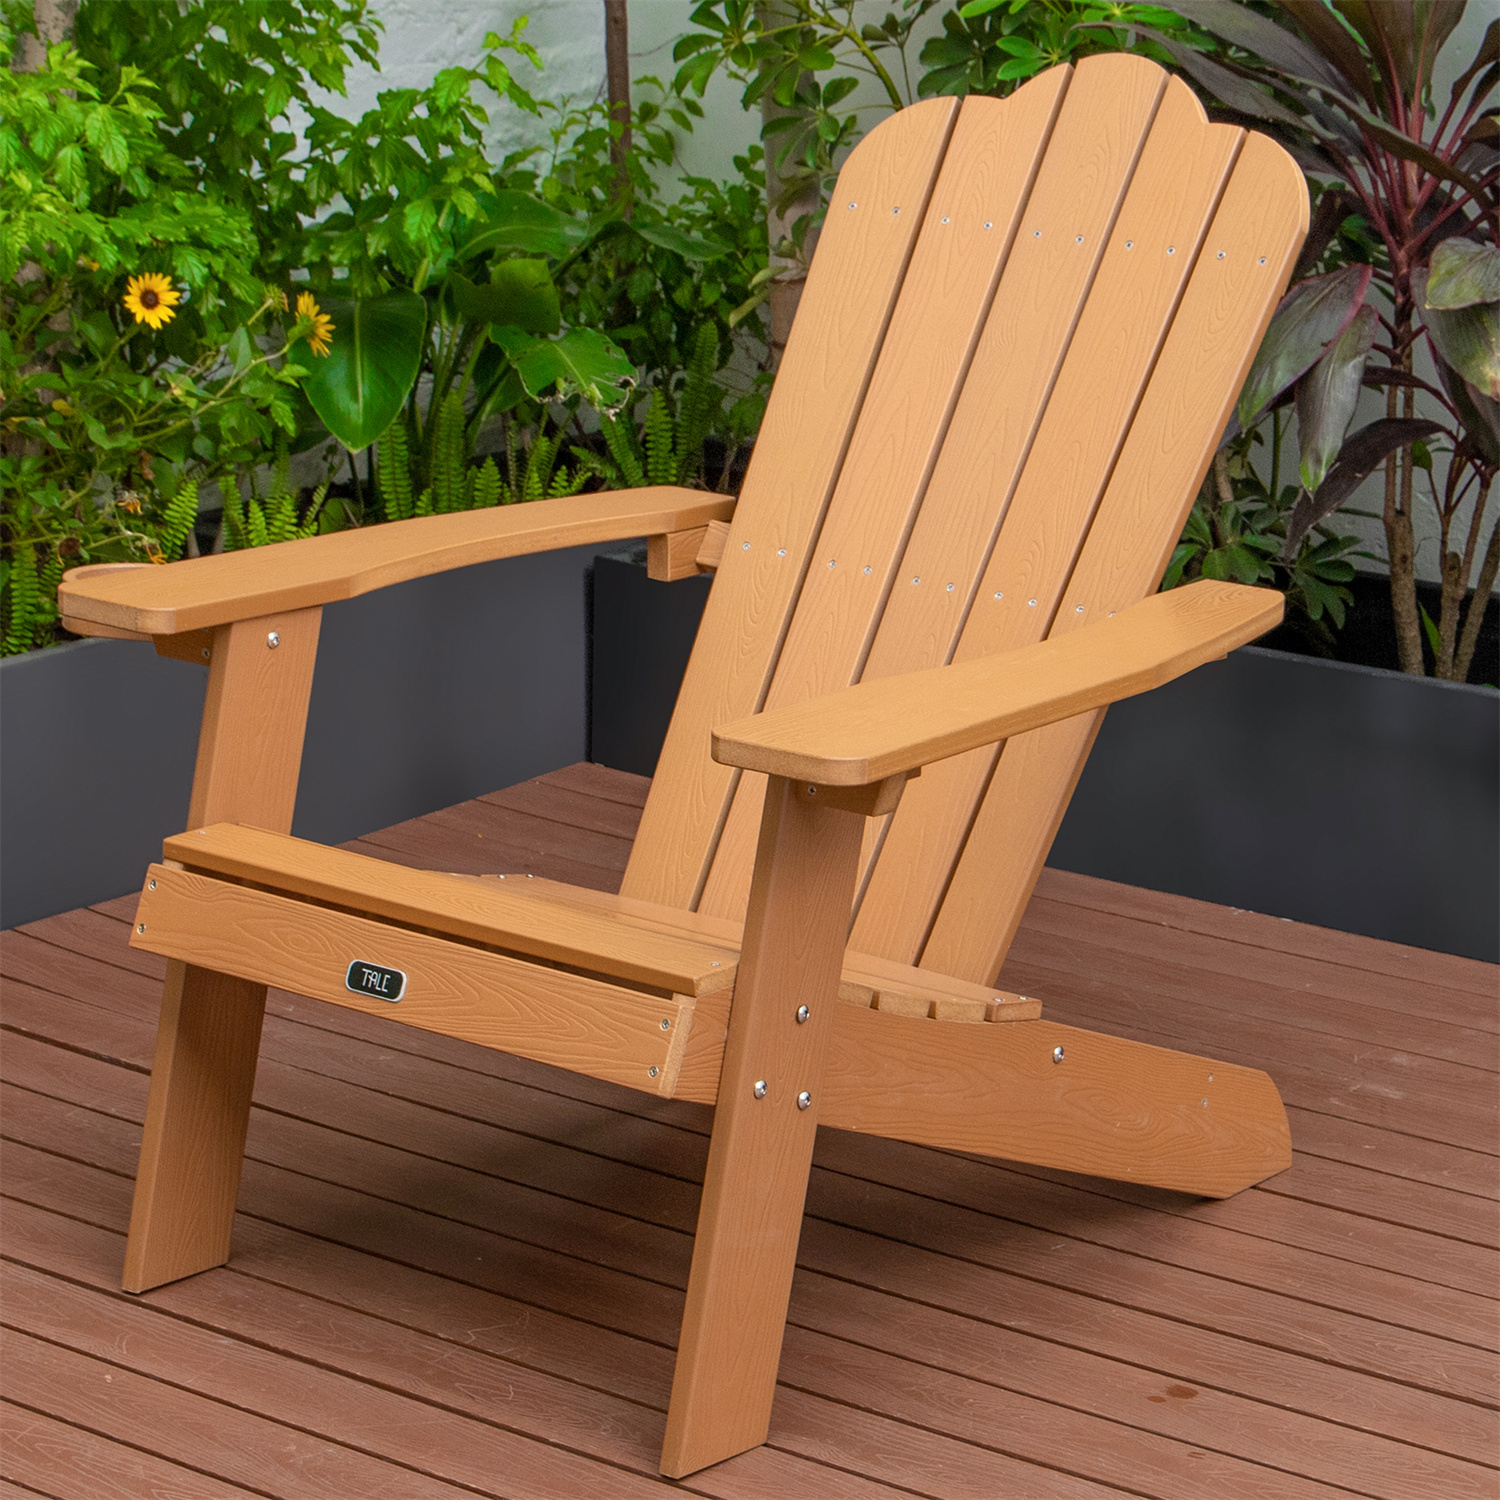 Oversized Folding Adirondack Chair with Cup Holder, Fade-Resistant Lounge Chair, 380lbs Capacity, All-Weather Chair for Lawn Outdoor Patio Deck Garden Porch Lawn, Brown - image 2 of 7